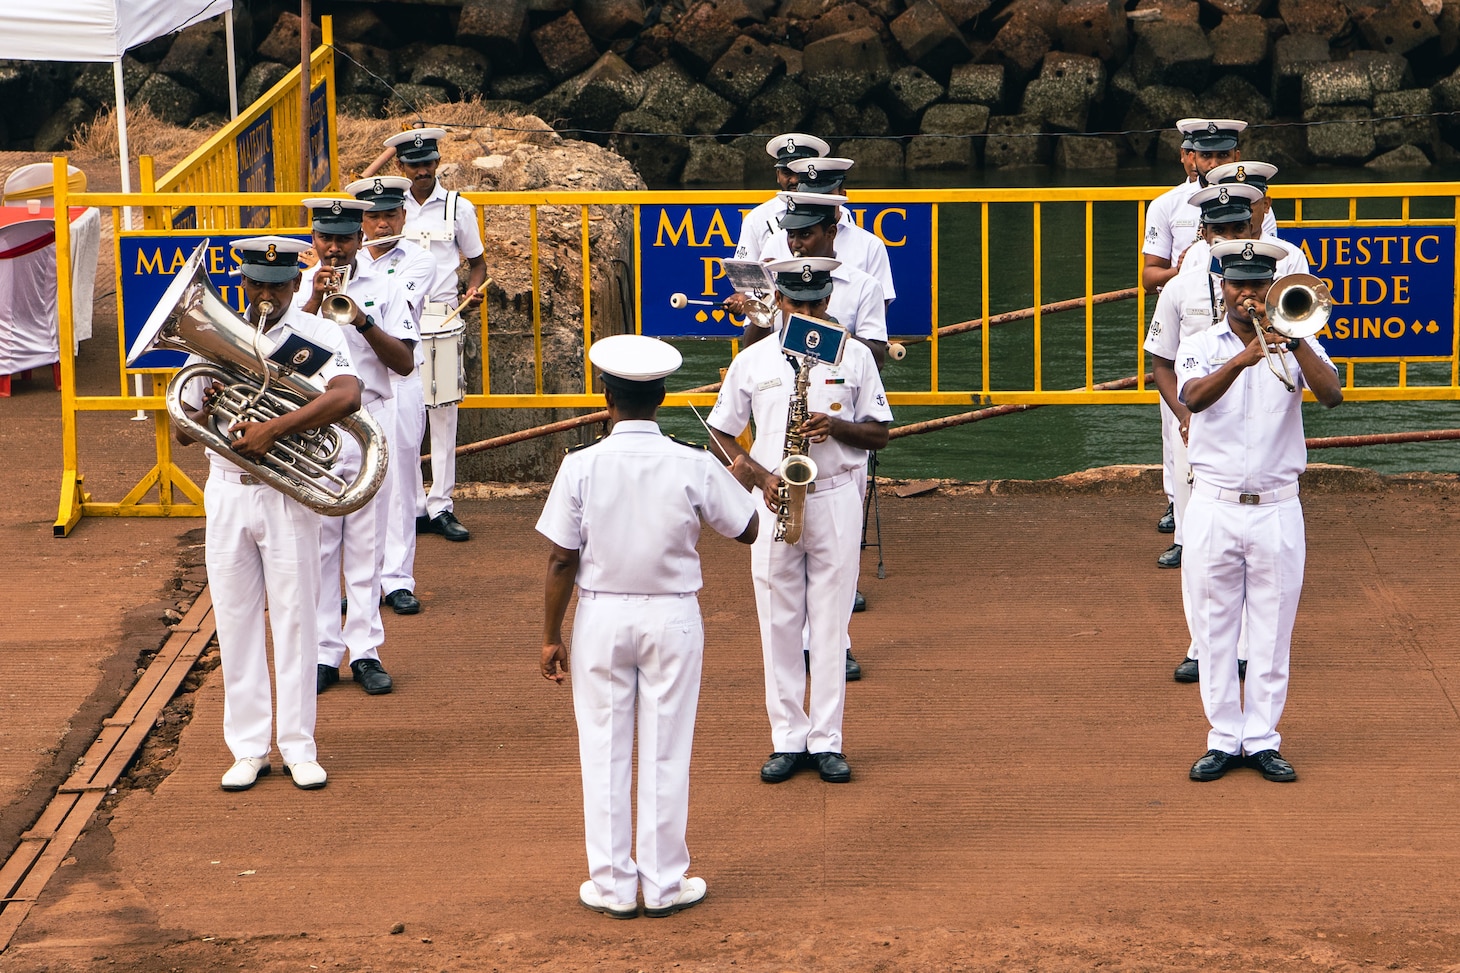 220423-N-TT059-1062 GOA, India (Apr. 23, 2022) A ceremonial band plays for the arrival of the Arleigh Burke-class guided-missile destroyer USS Momsen (DDG 92) in Goa, India for a scheduled port visit. USS Momsen is assigned to Commander, Task Force 71/Destroyer Squadron (DESRON) 15, the Navy's largest forward-deployed DESRON and the U.S. 7th Fleet's principal surface force, and is underway supporting a free and open Indo-Pacific. (U.S. Navy photo by Mass Communication Specialist 3rd Class Lily Gebauer)